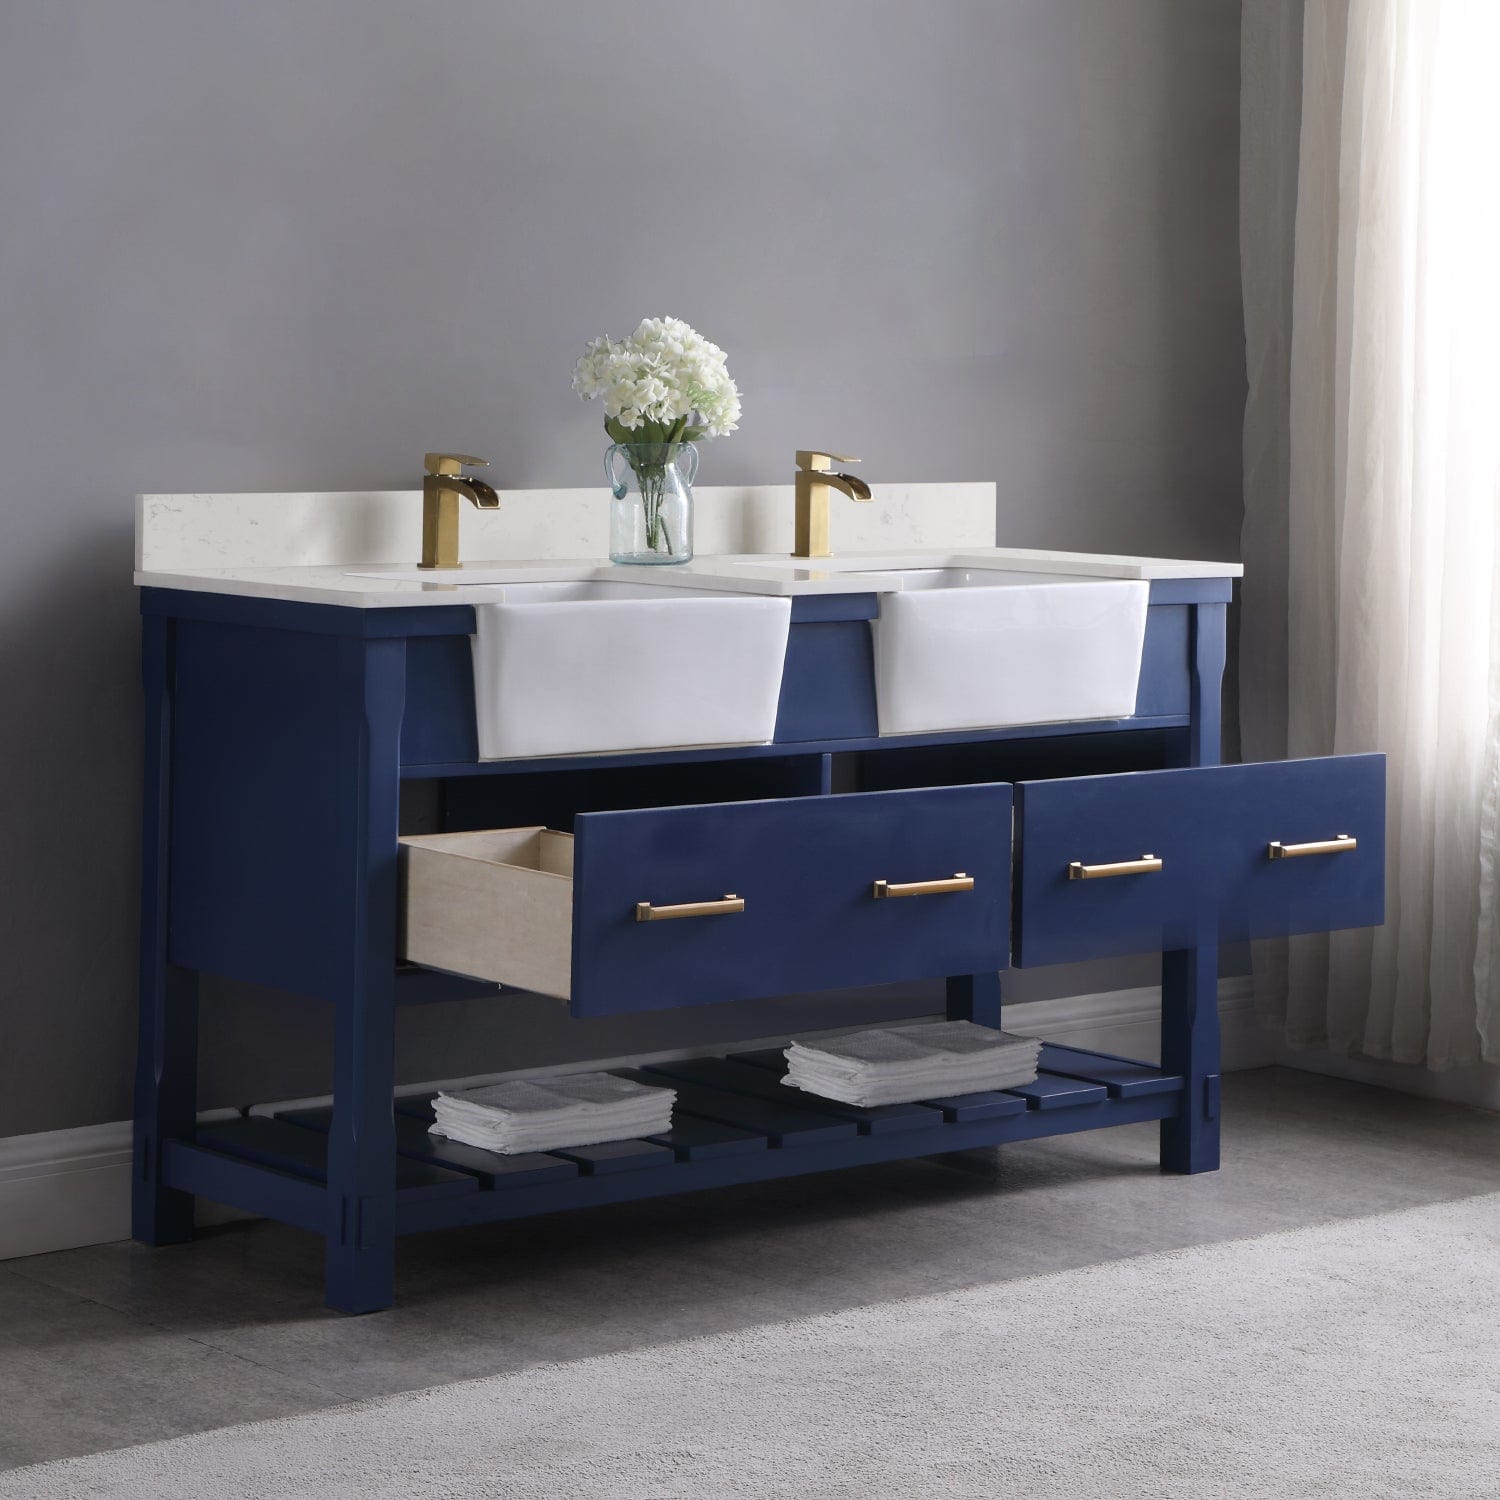 Altair Georgia 60" Double Bathroom Vanity Set in Jewelry Blue and Composite Carrara White Stone Top with White Farmhouse Basin without Mirror 537060-JB-AW-NM - Molaix631112970648Vanity537060-JB-AW-NM